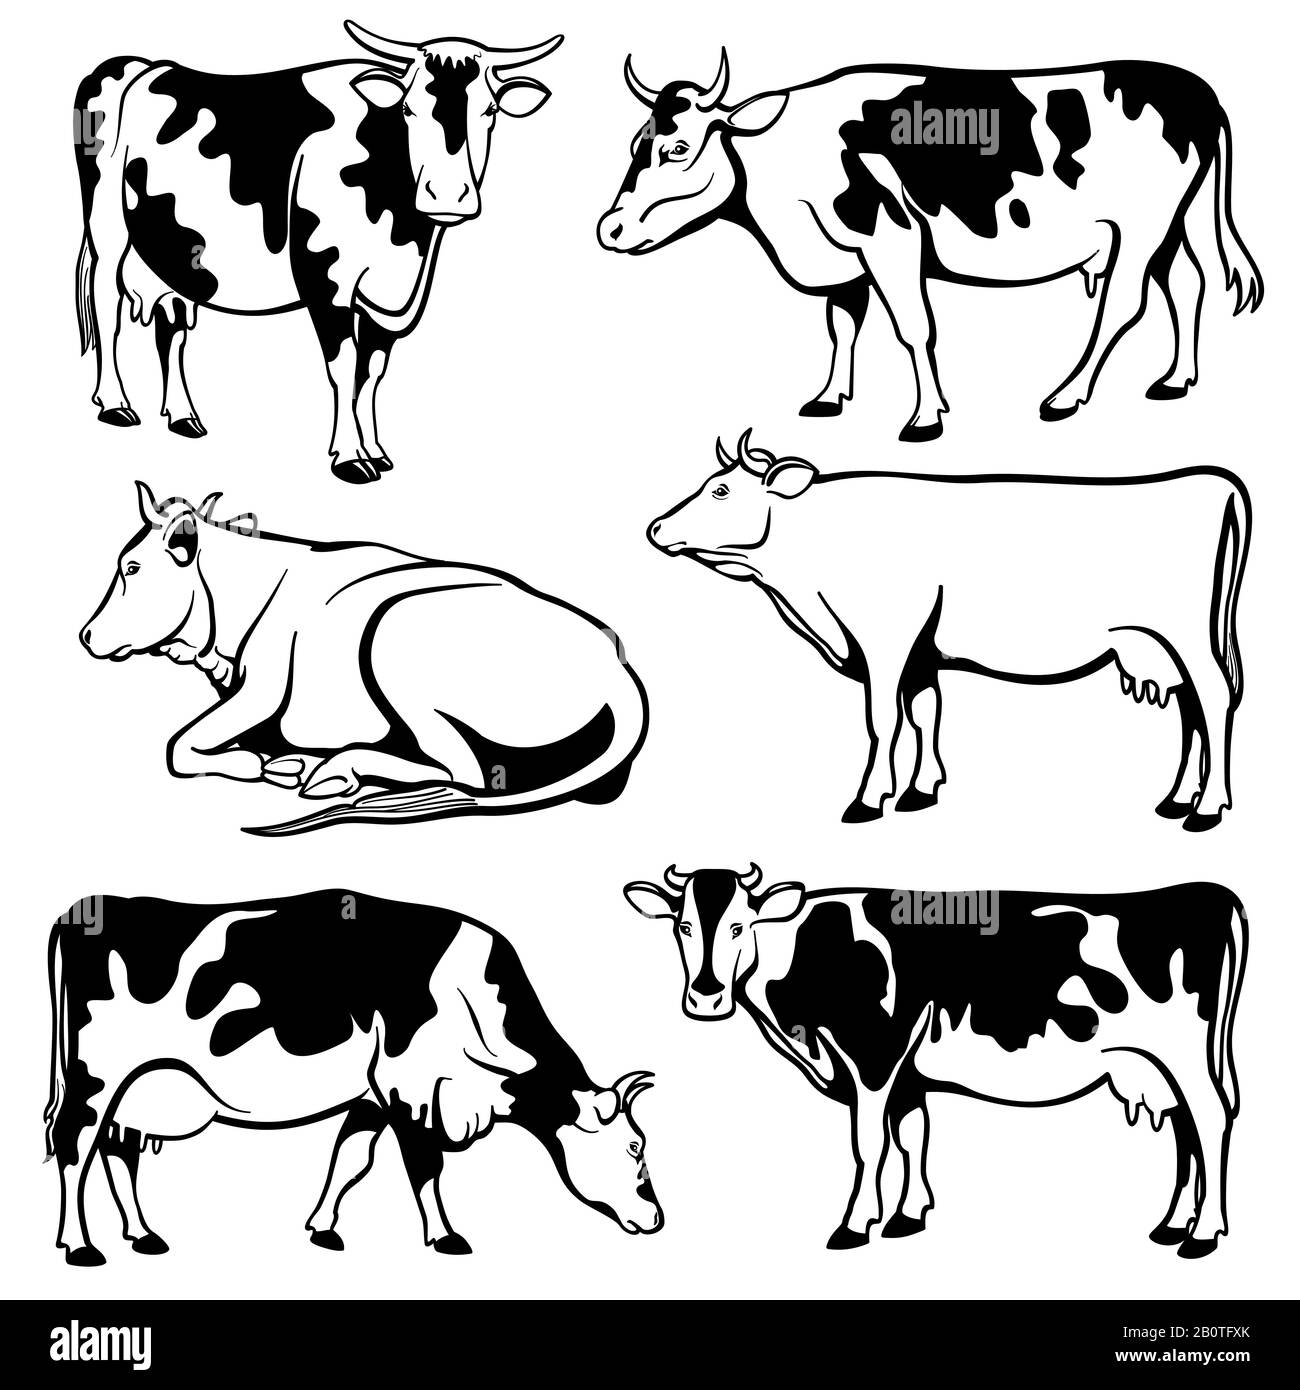 Black and white cows vector set. Farm cow illustration, cattle black silhouette Stock Vector